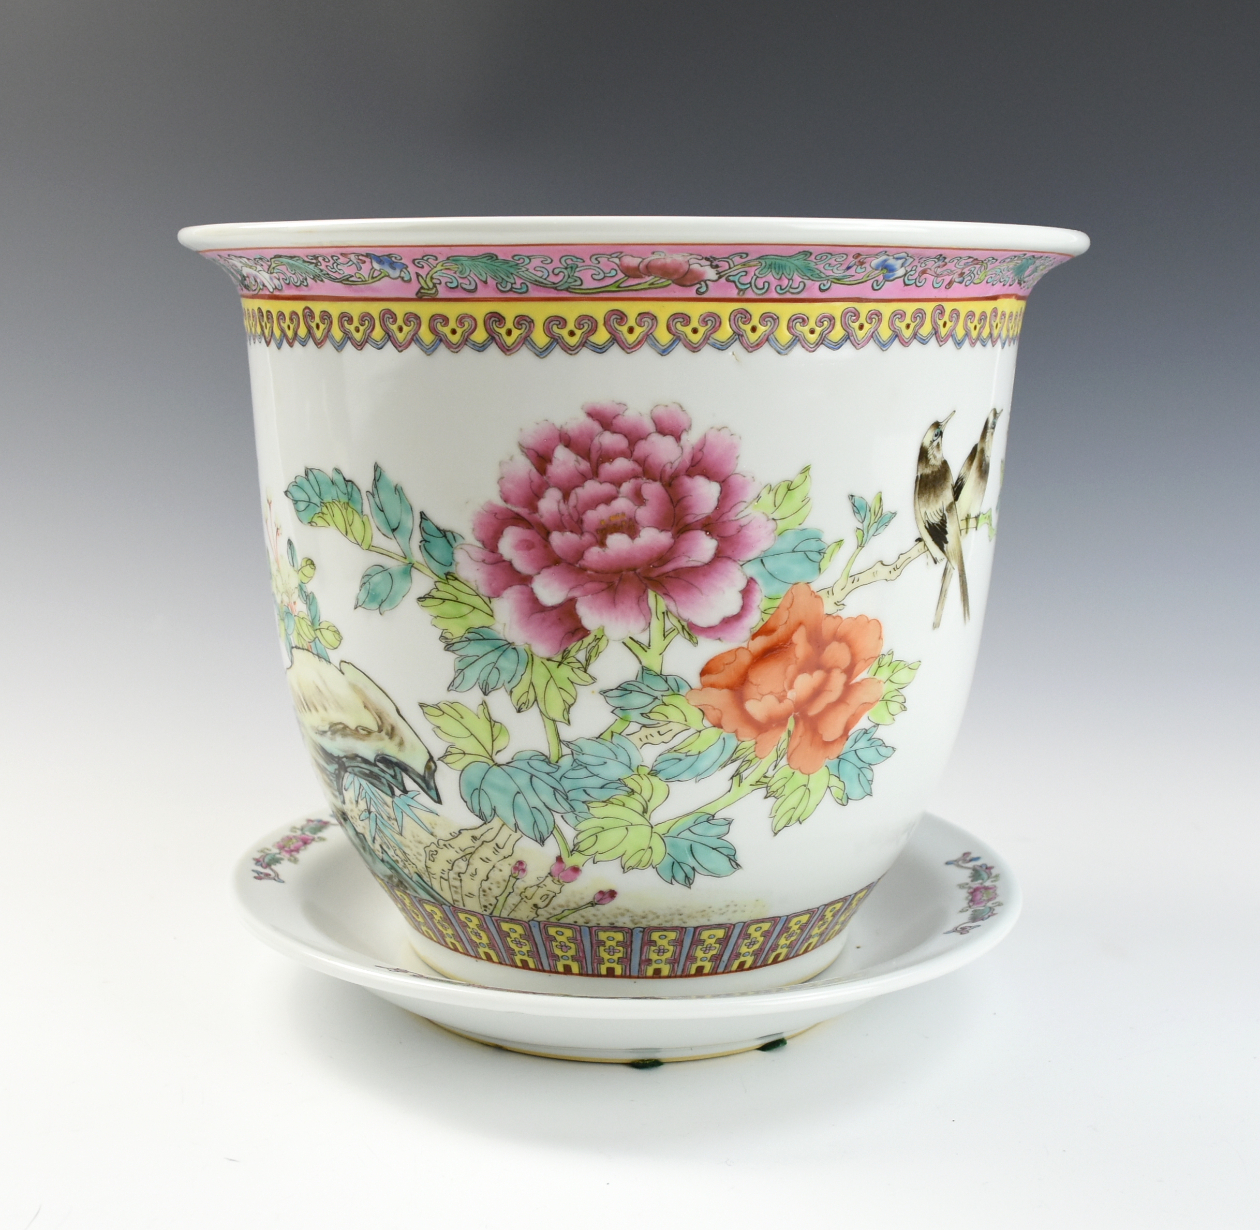 CHINESE FAMILLE ROSE FLOWER BASIN 2ced6c